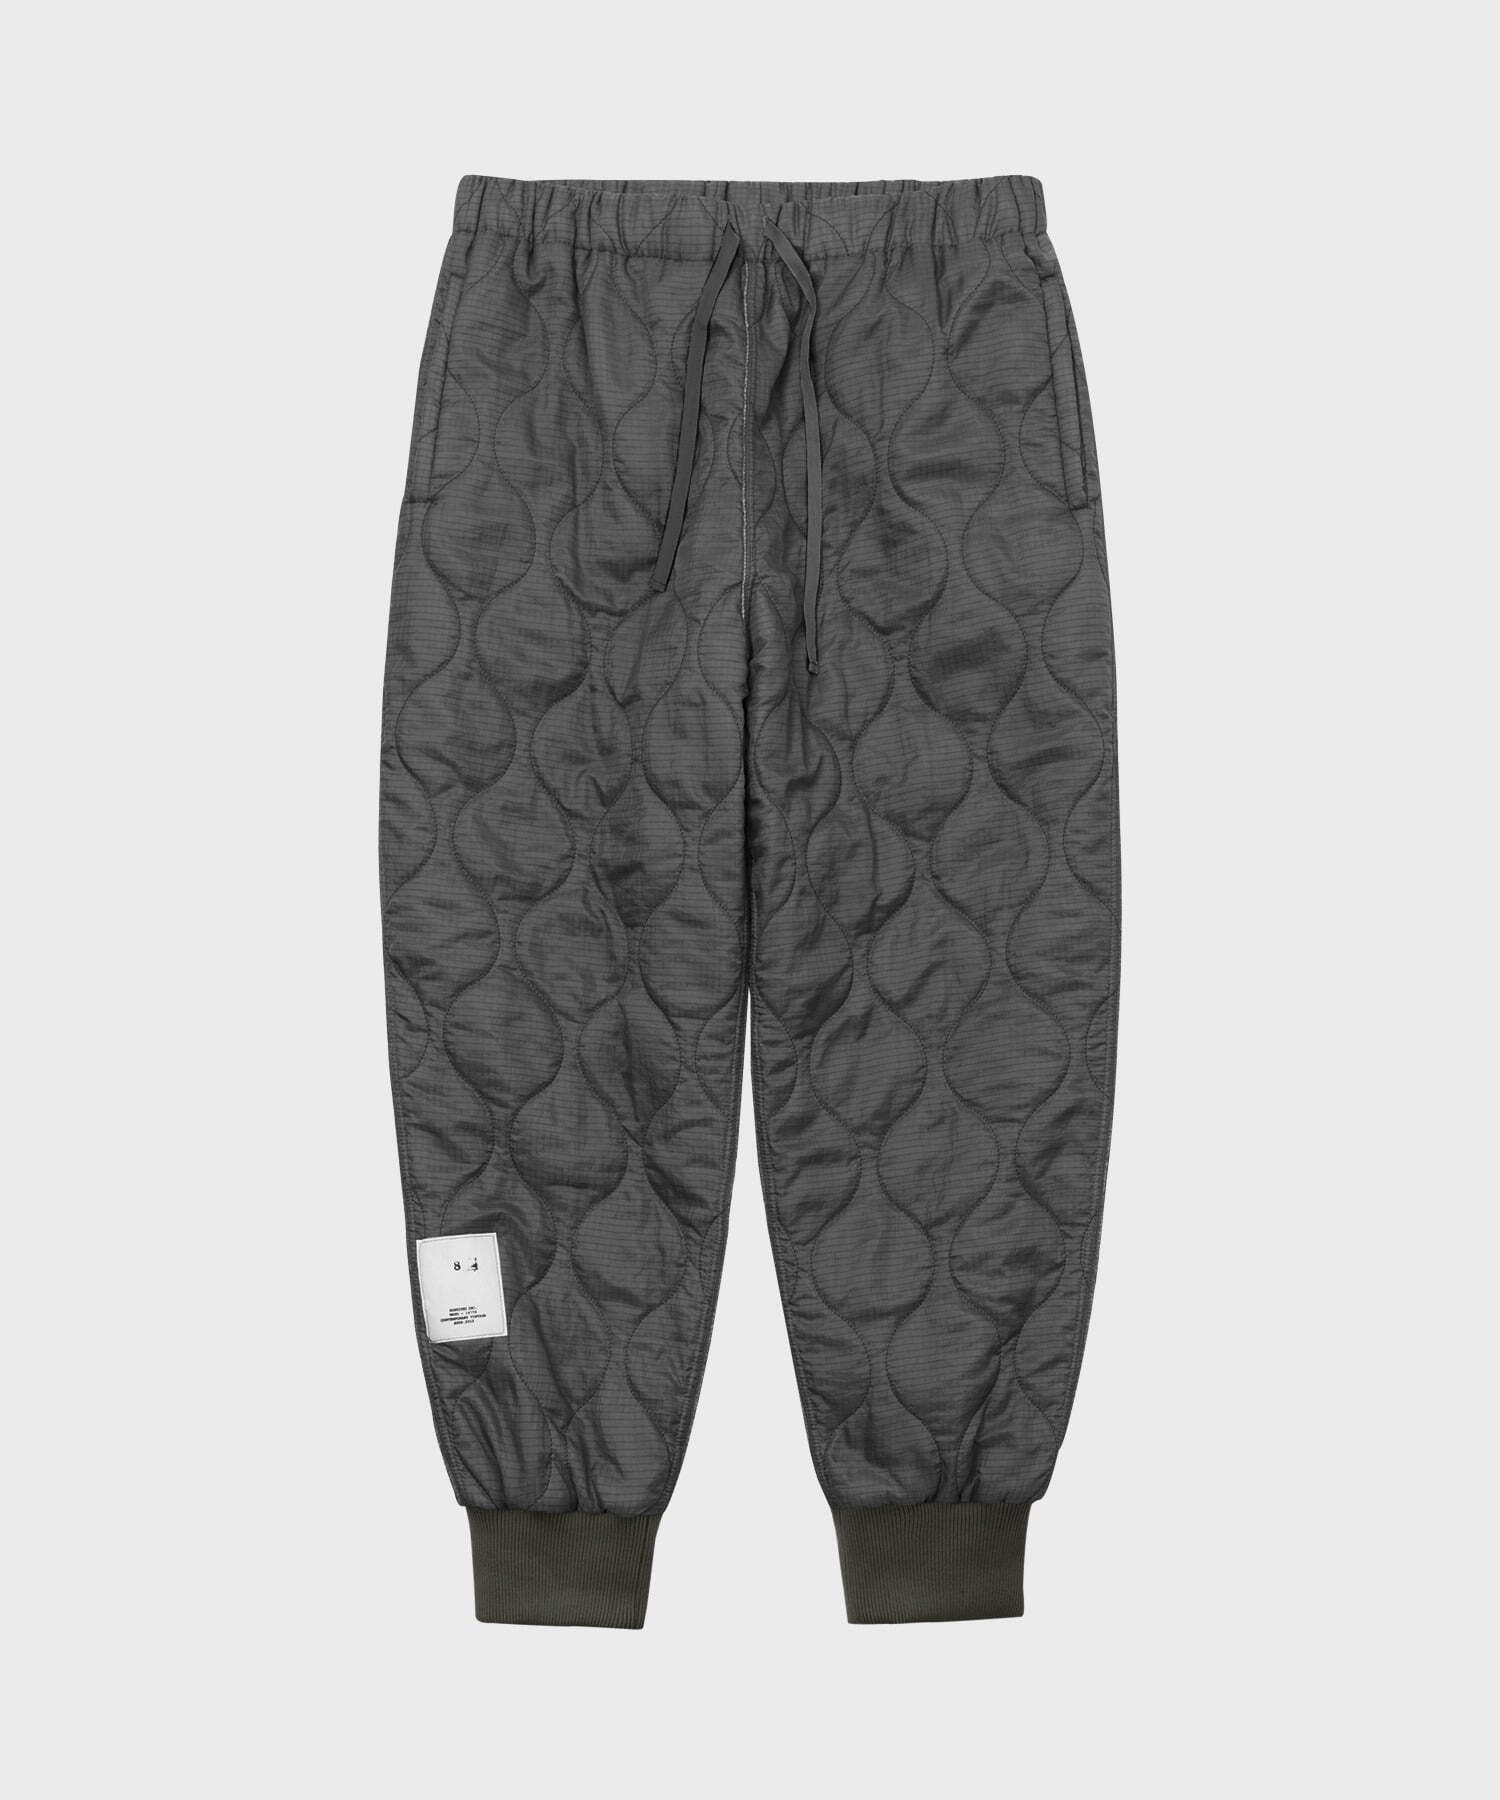 M65 QUILTING PANTS (GRAY)